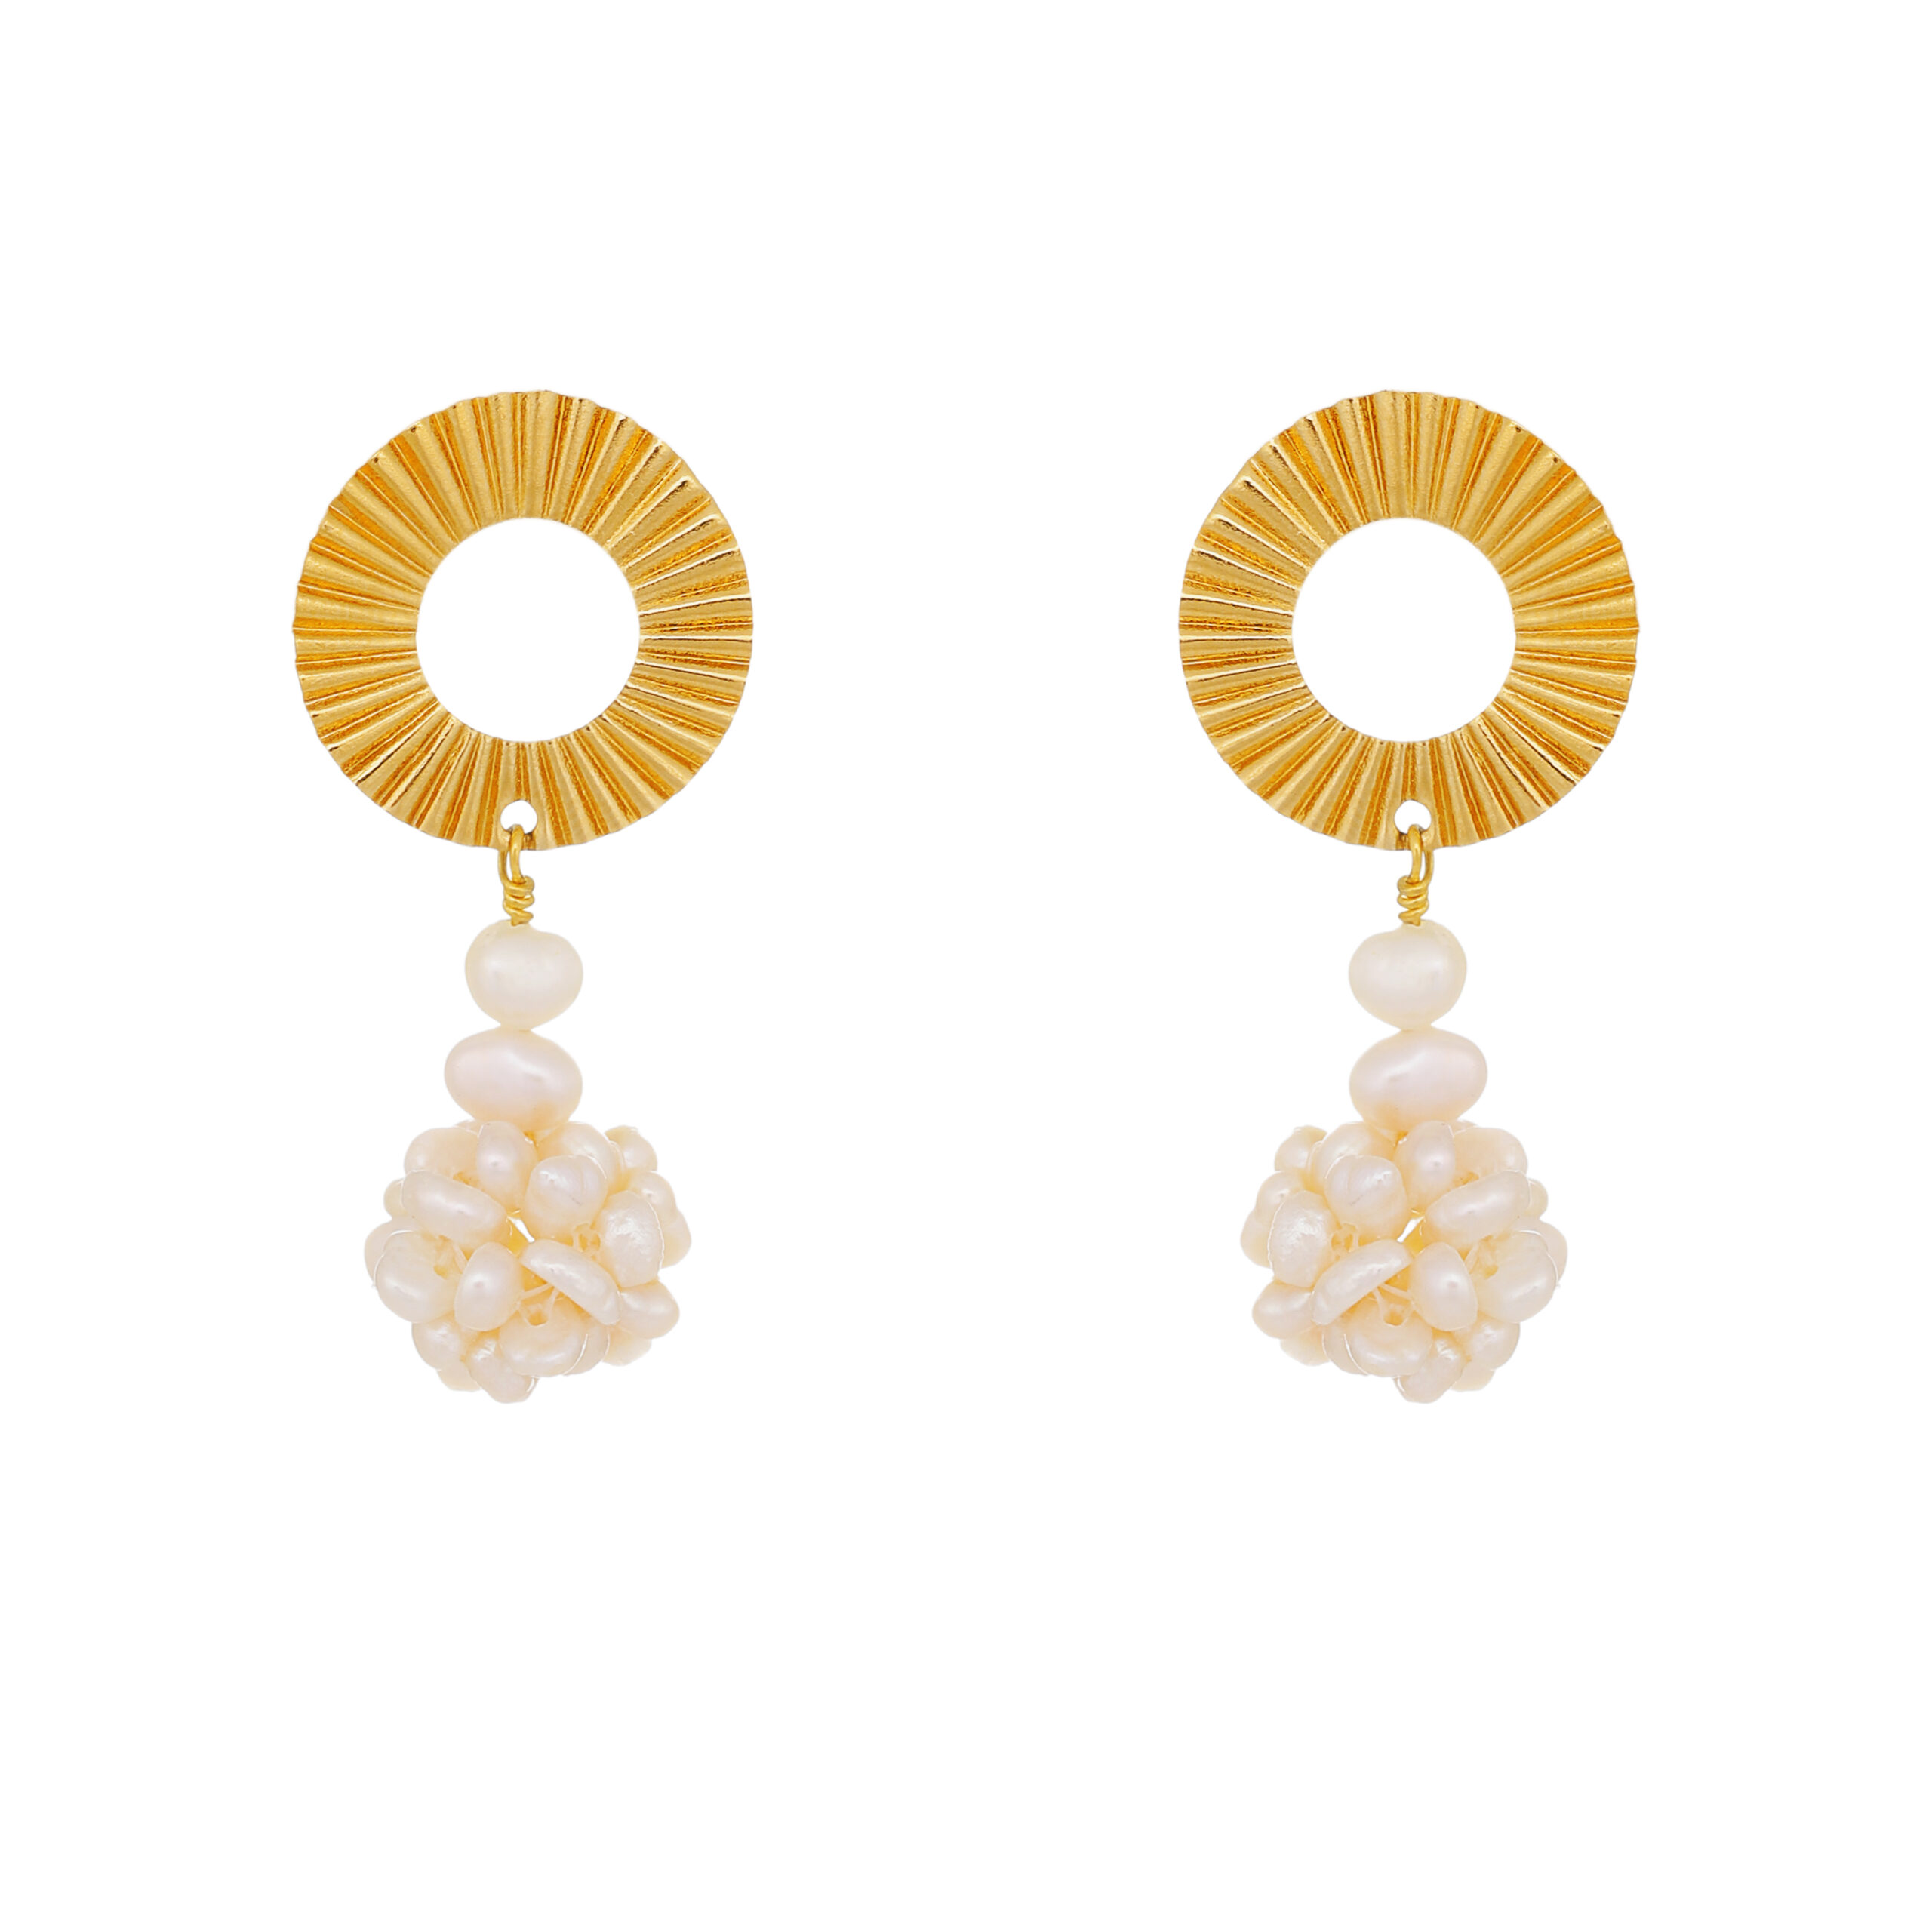 Earrings round and beaded flowers